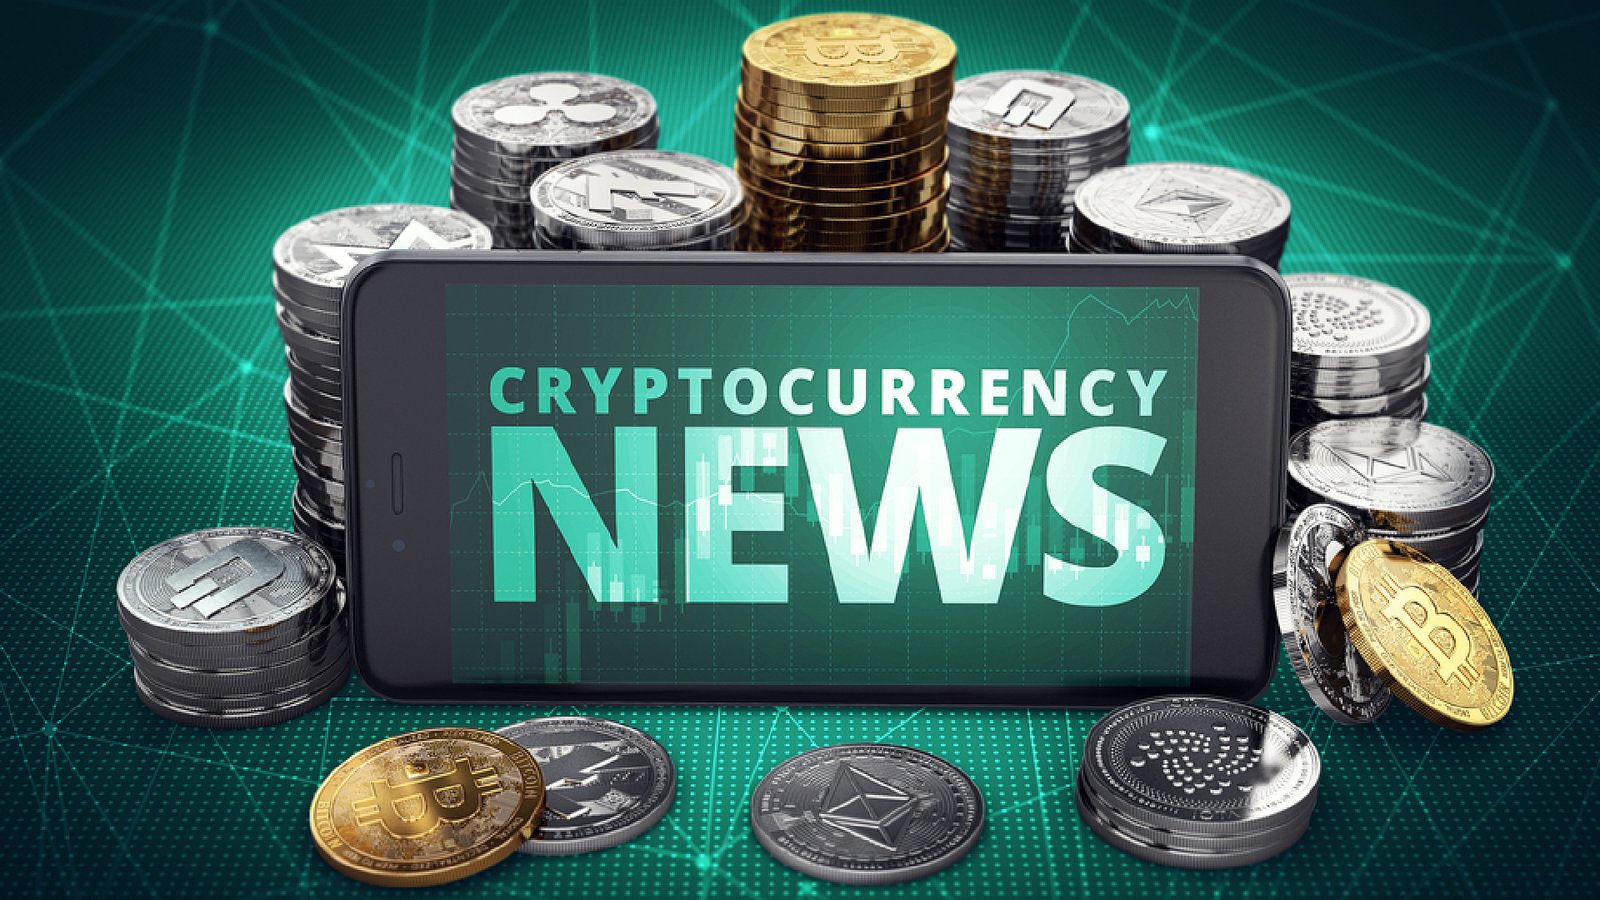 Cryptocurrency News and Trends